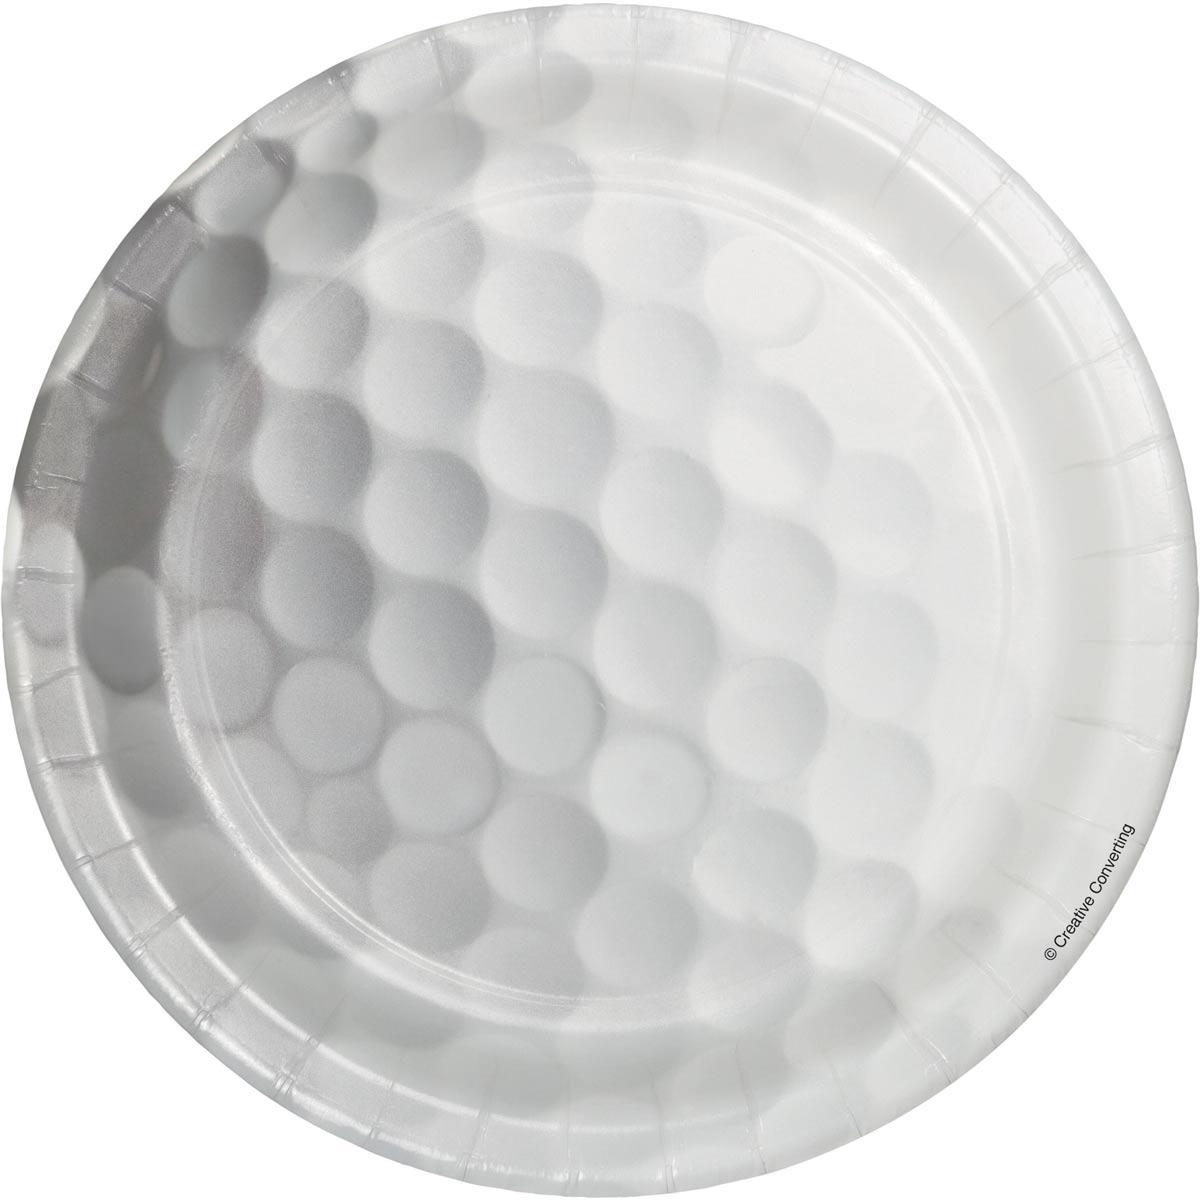 Sports Fanatic Golf 7" Lunch Paper Plates by Creative Party 417965 available here at Karnival Costumes online party shop